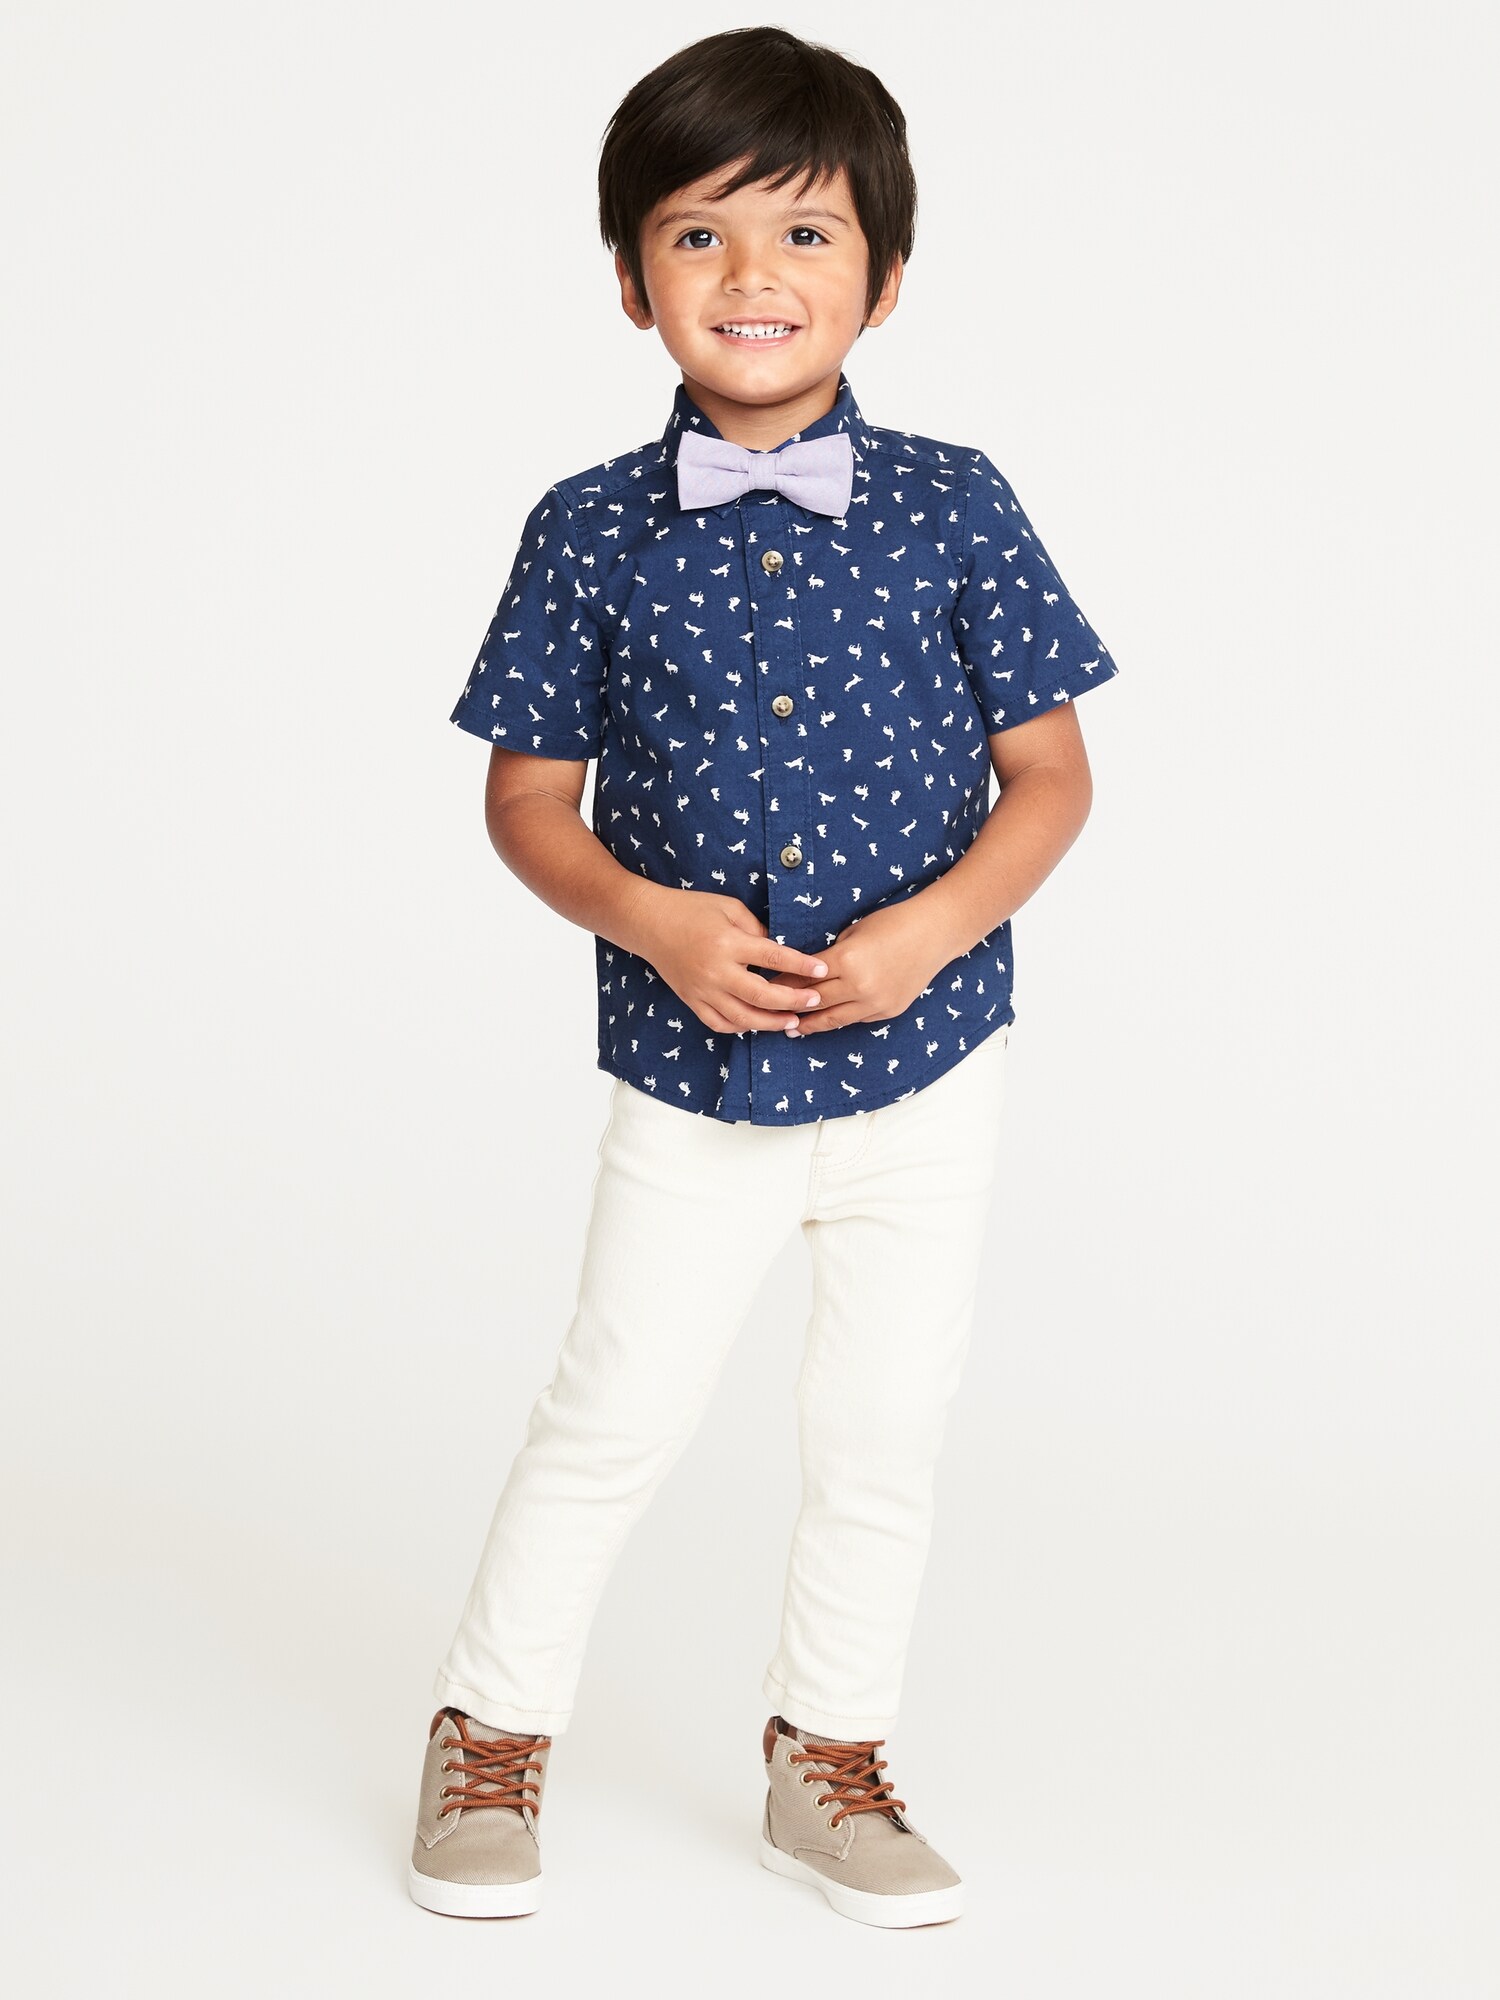 Built-In Flex Bunny Shirt & Bow-Tie Set for Toddler Boys | Old Navy